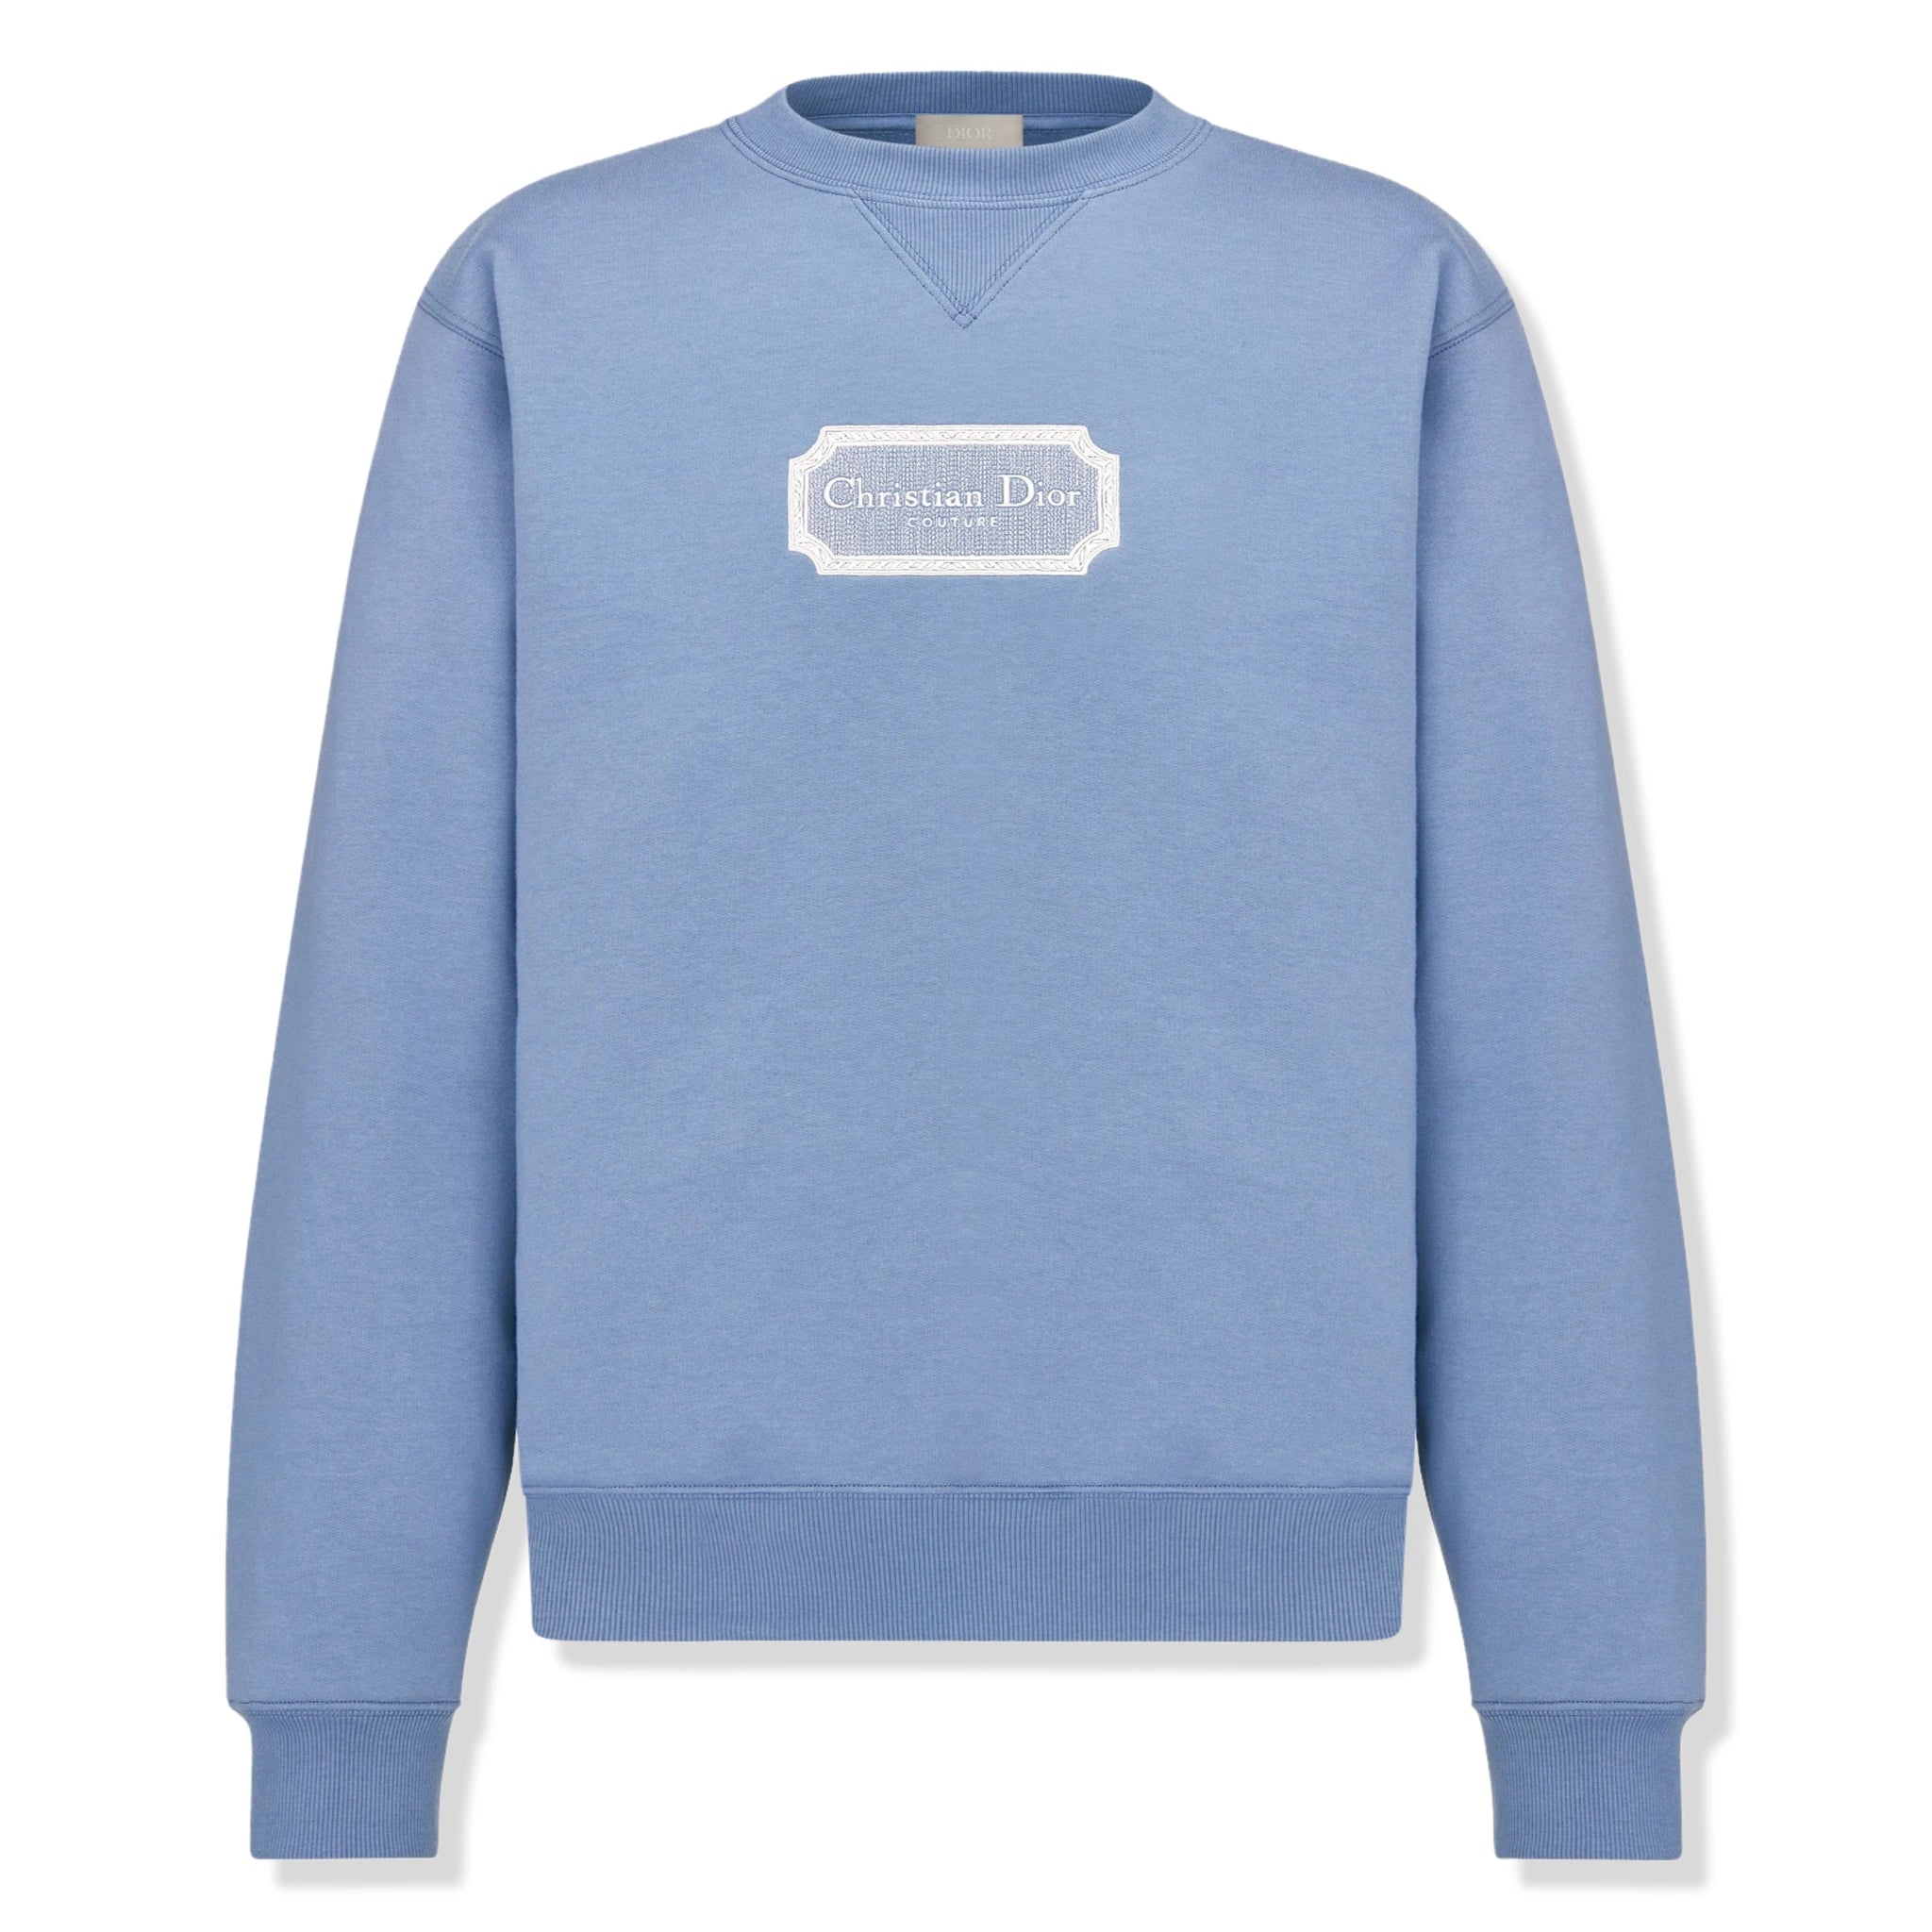 Front view of Dior 'Christian Dior Couture' Relaxed Fit Blue Sweatshirt 343J694A0531_C580